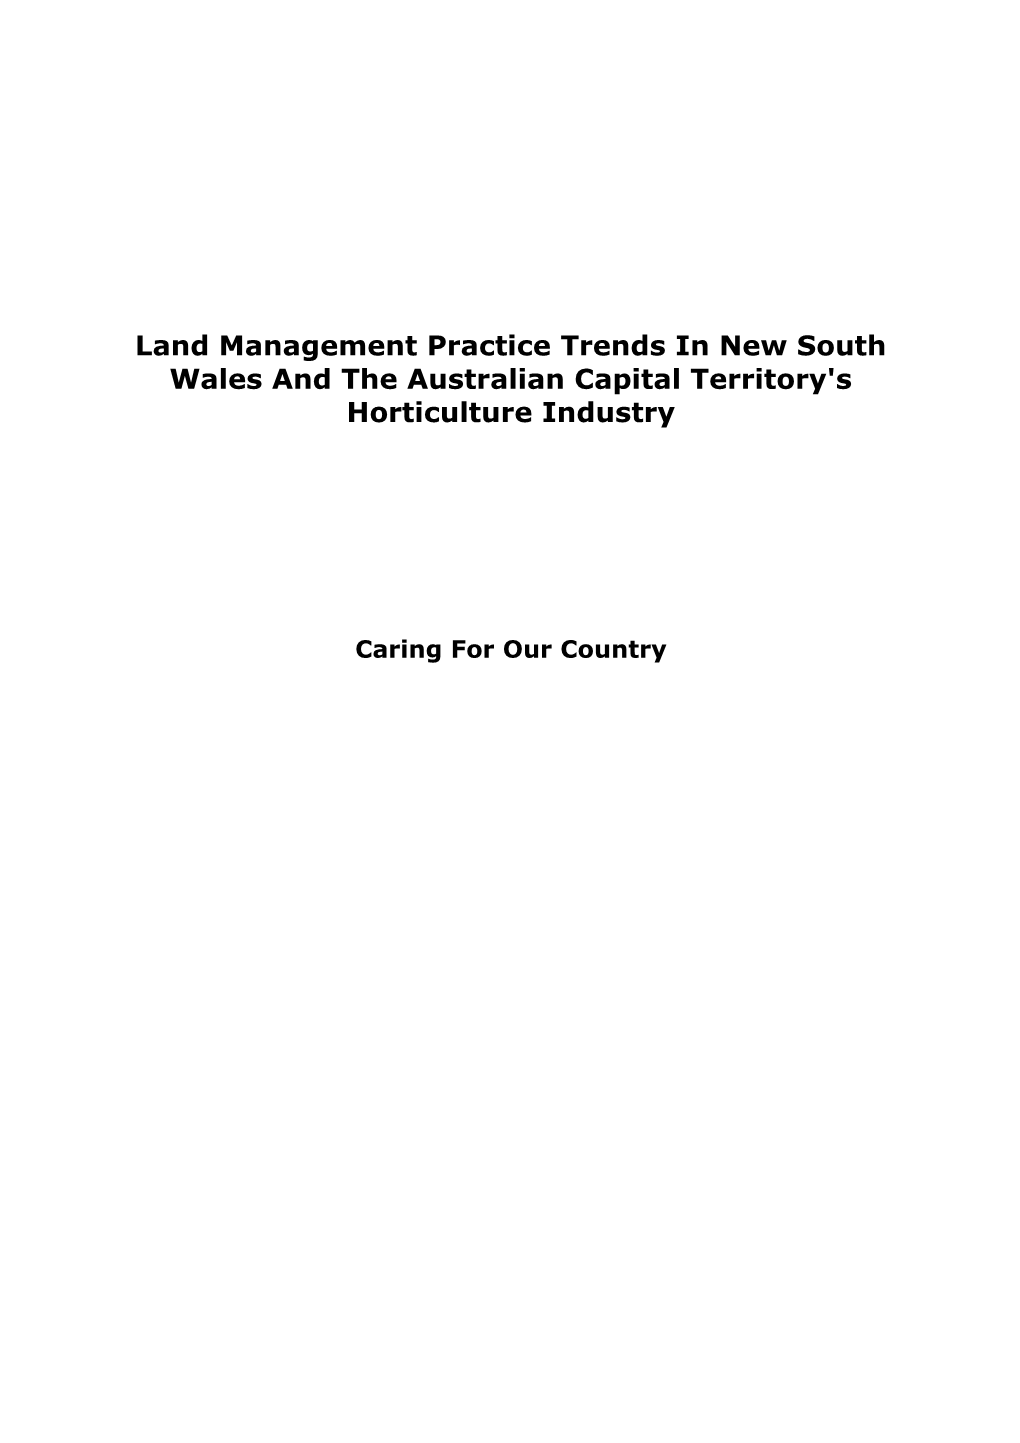 Land Management Practice Trends in New South Wales and the Australian Capital Territory's